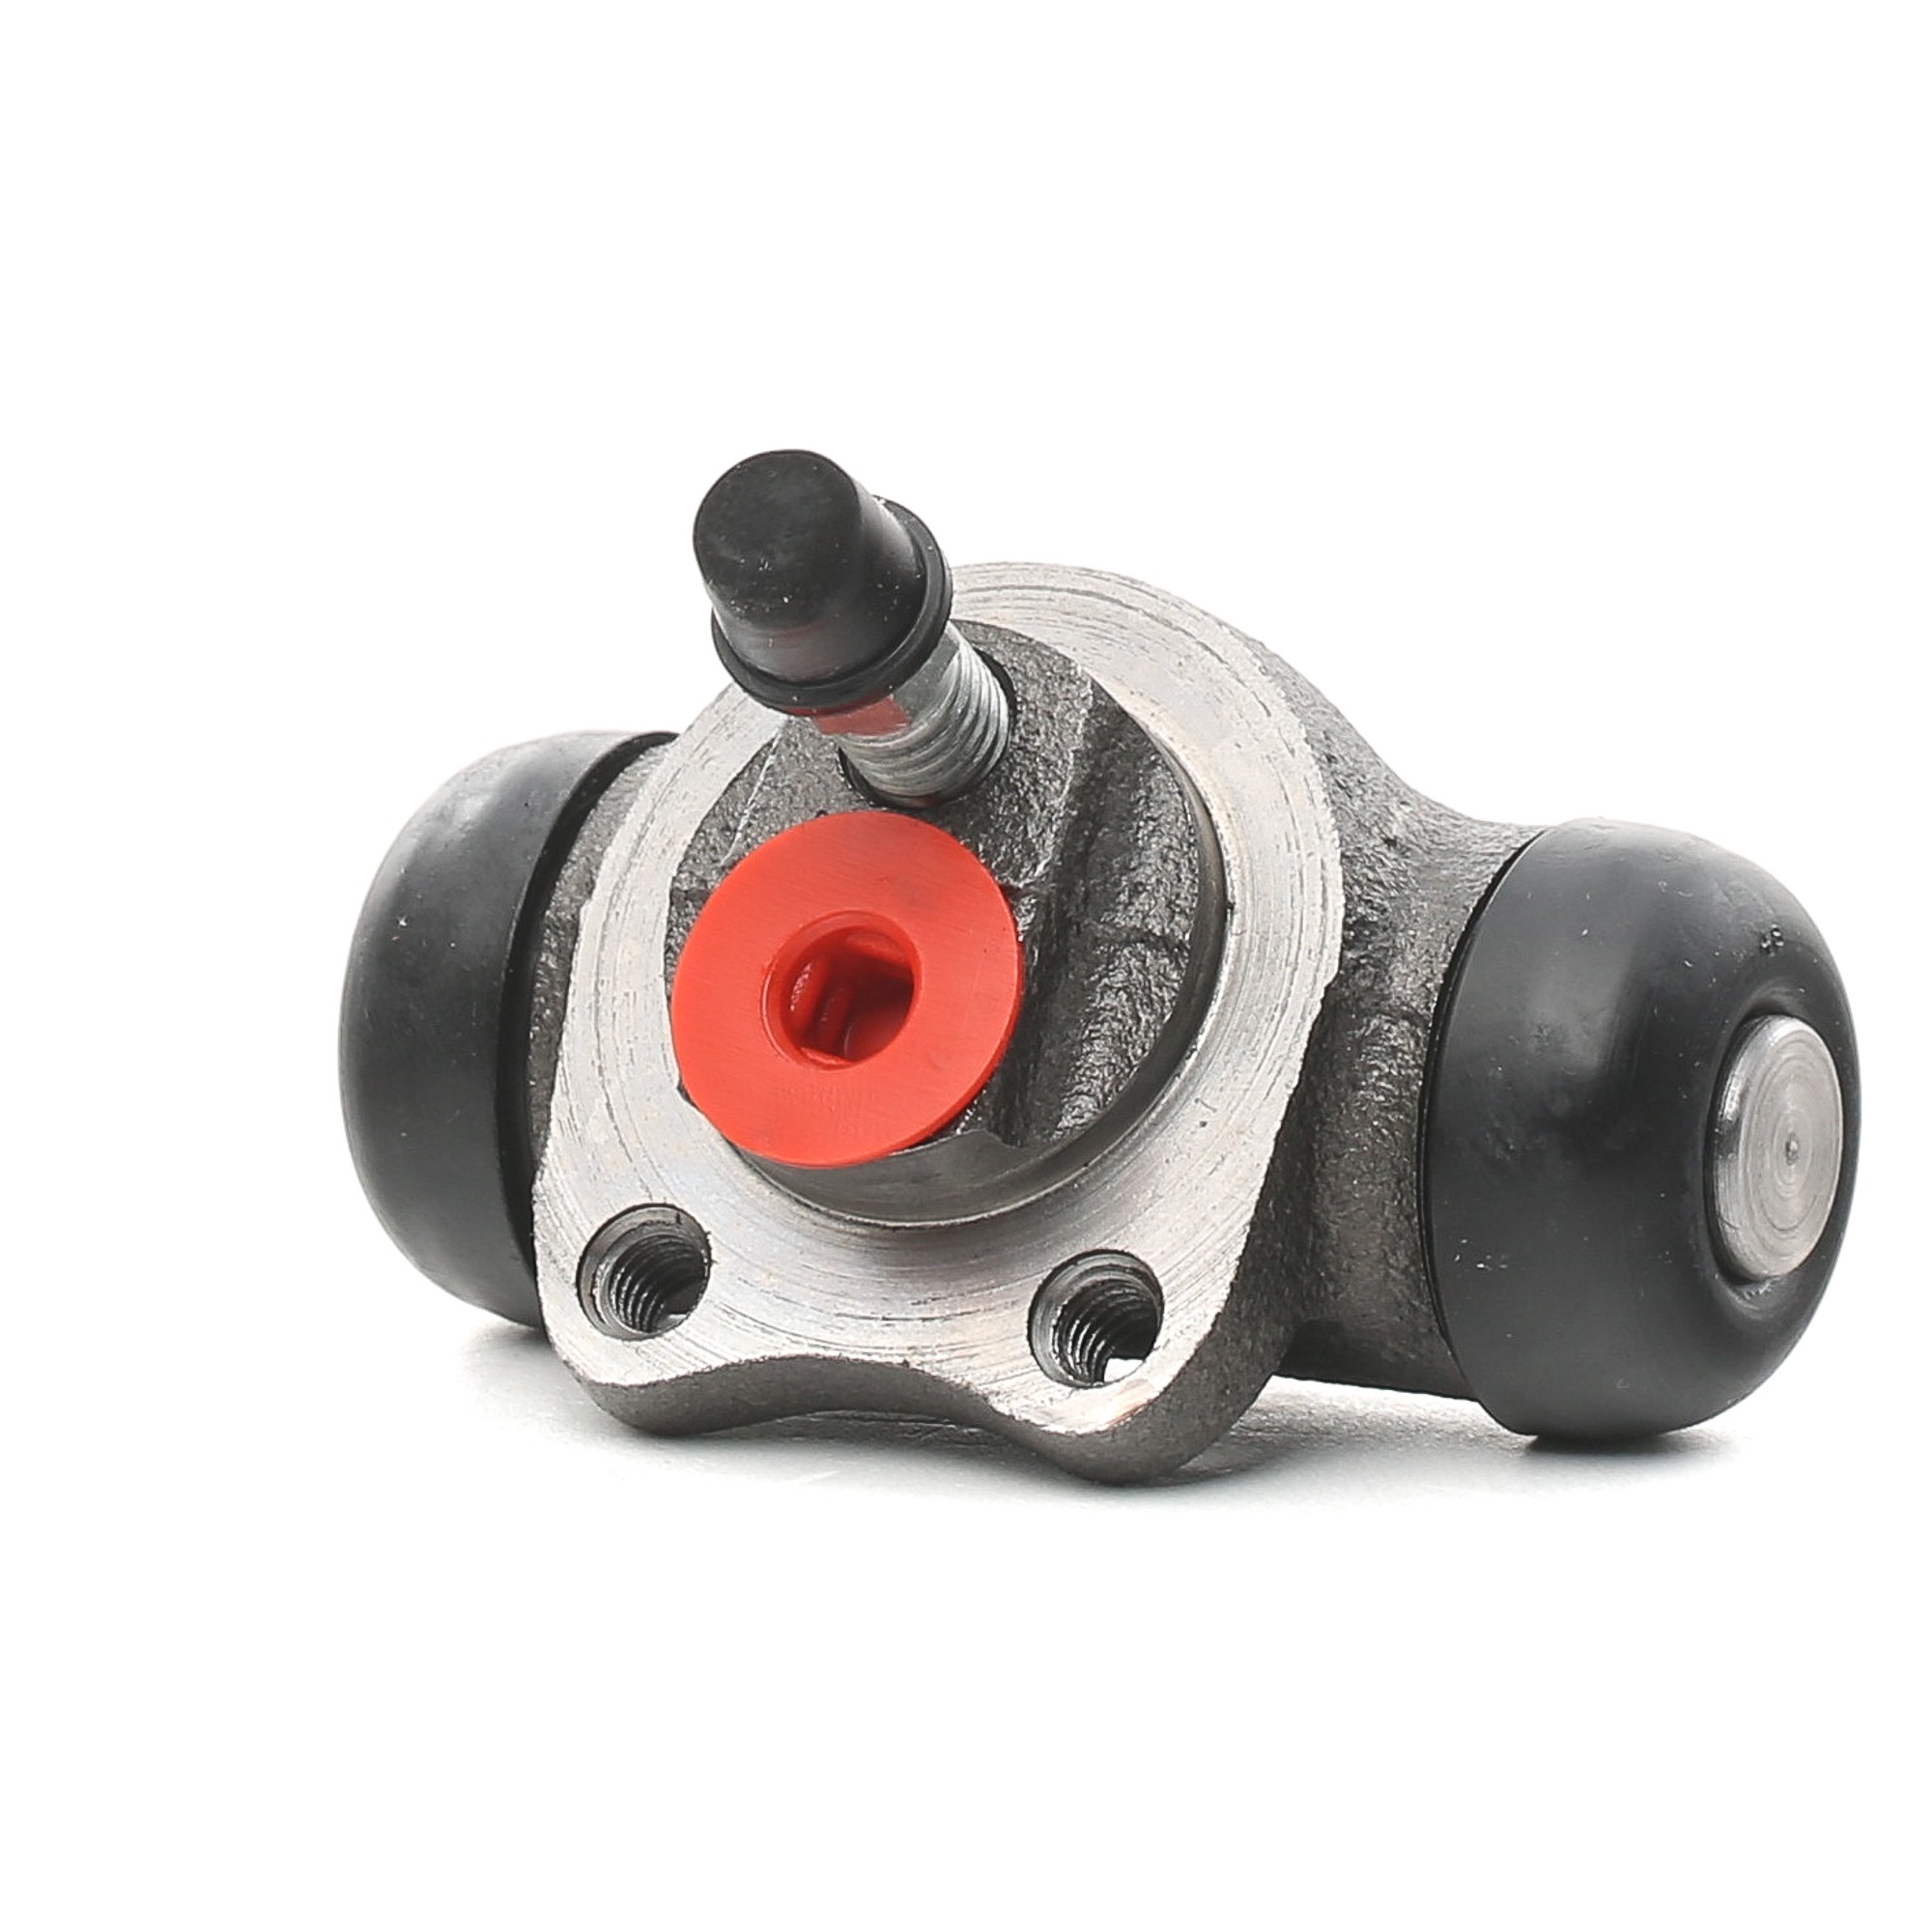 Opel Wheel Brake Cylinder A.B.S. 2701 at a good price